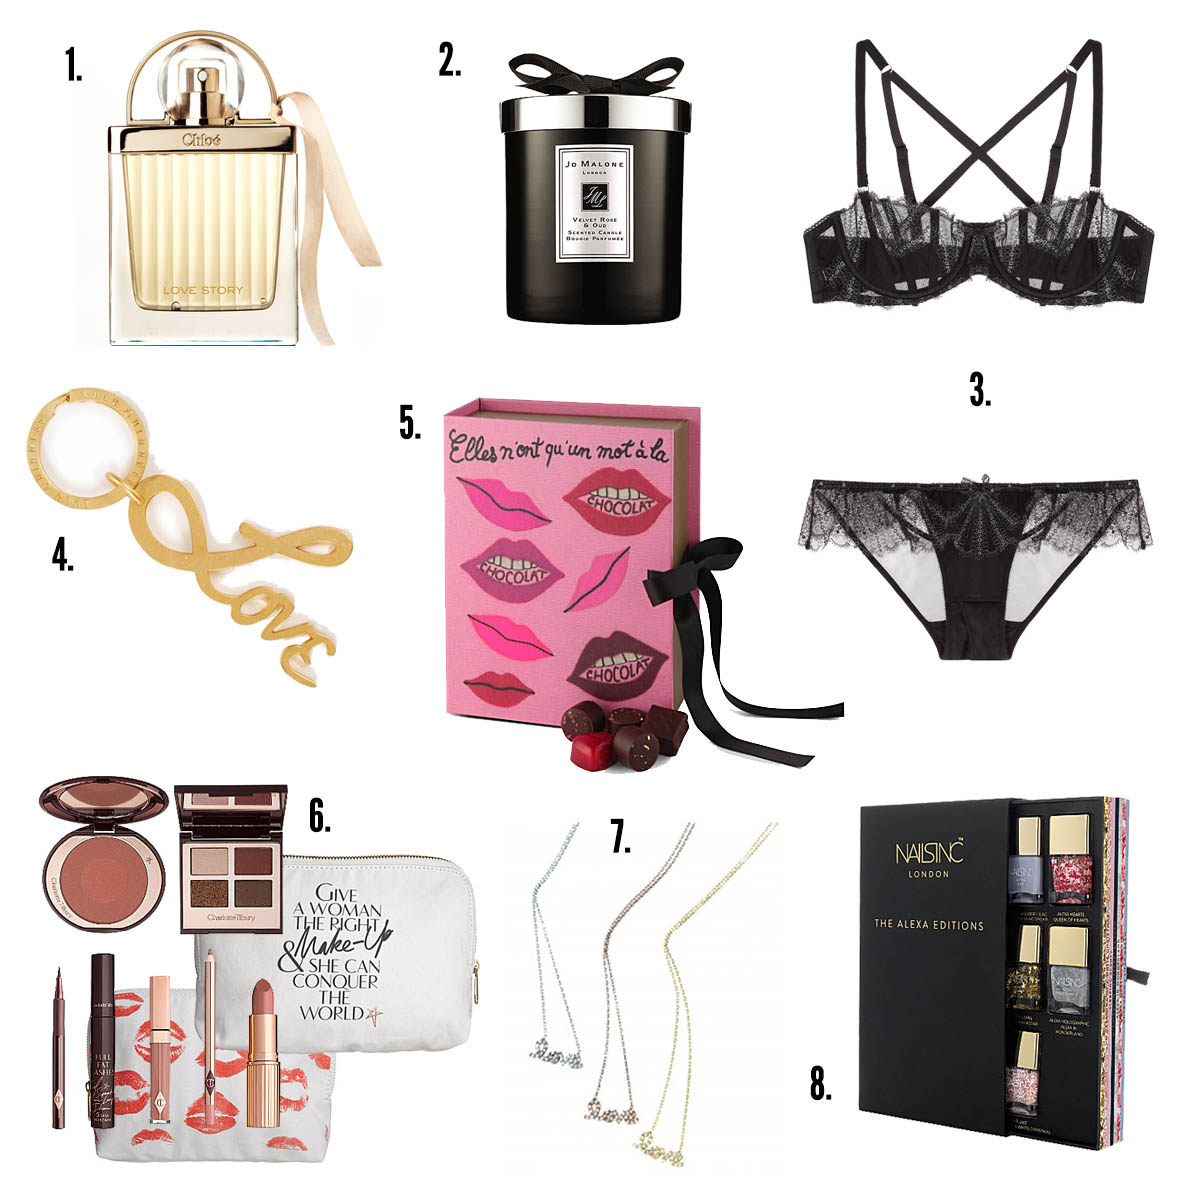 VALENTINES DAY GIFT GUIDE